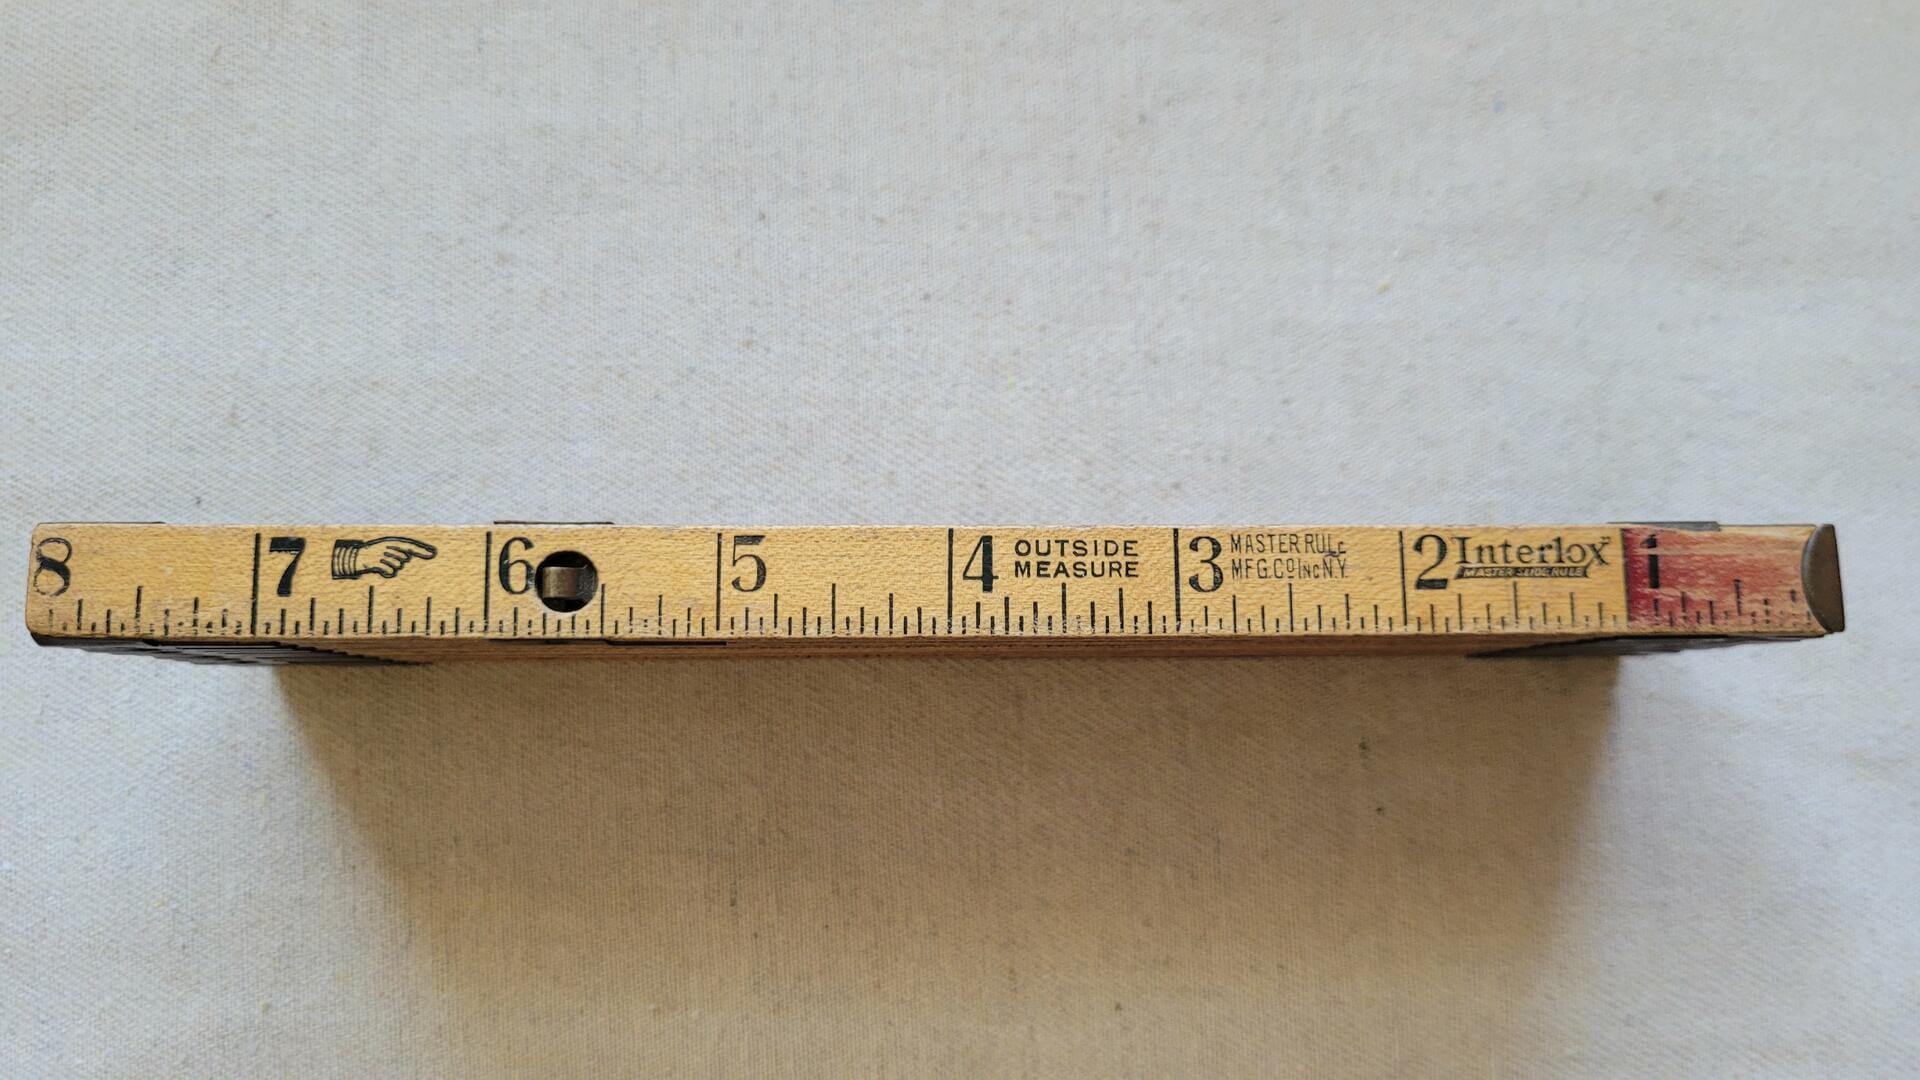 Vintage Wooden Slide Ruler Interlox No. 106 Master Rule Mfg. Co. NY - Antique Woodworking and Carpentry Collectible made in USA marking and measuring tools